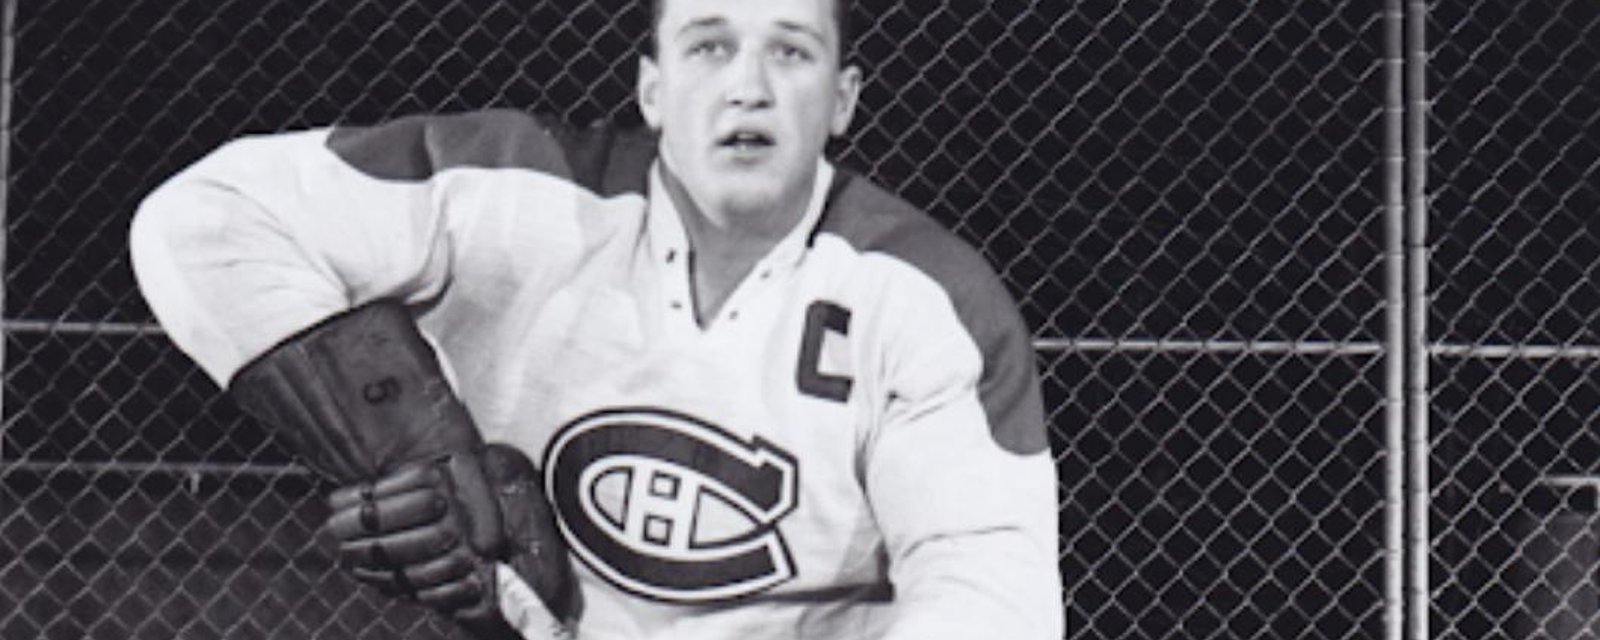 Albert “junior” Langlois, 3 time Stanley Cup champion, has died.